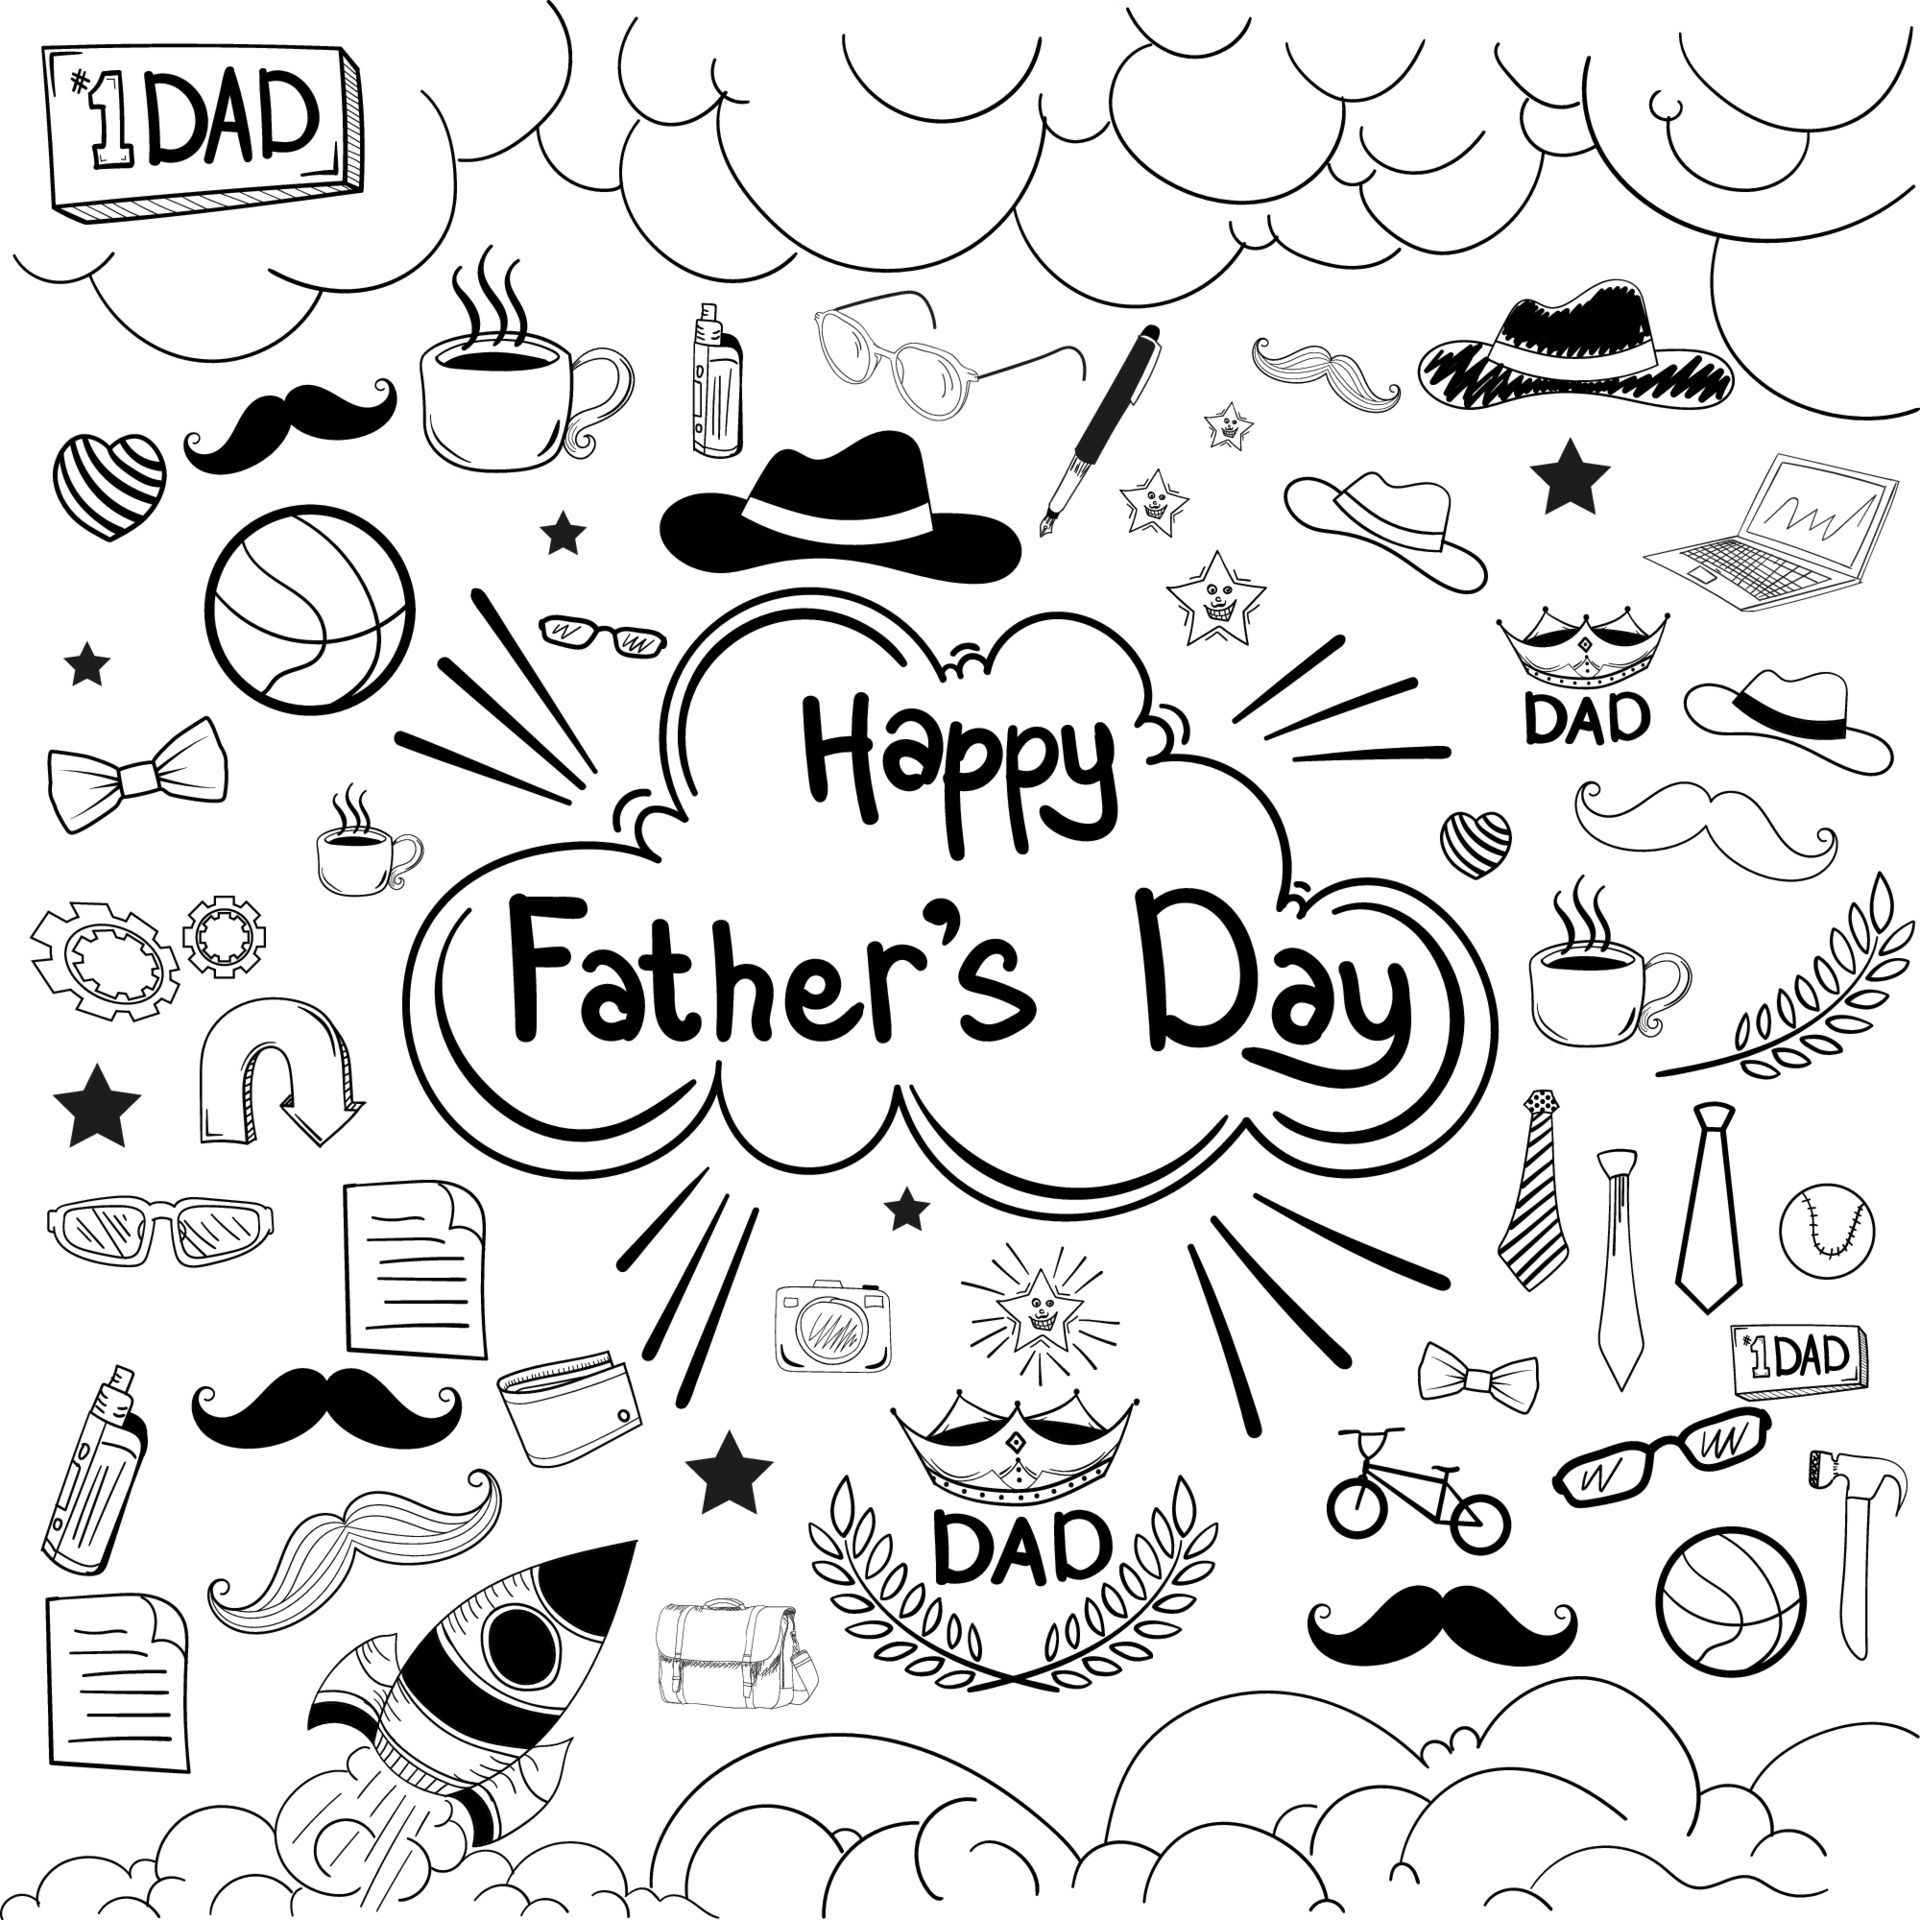 Father's Day Directed Drawing - Amy Lemons-saigonsouth.com.vn